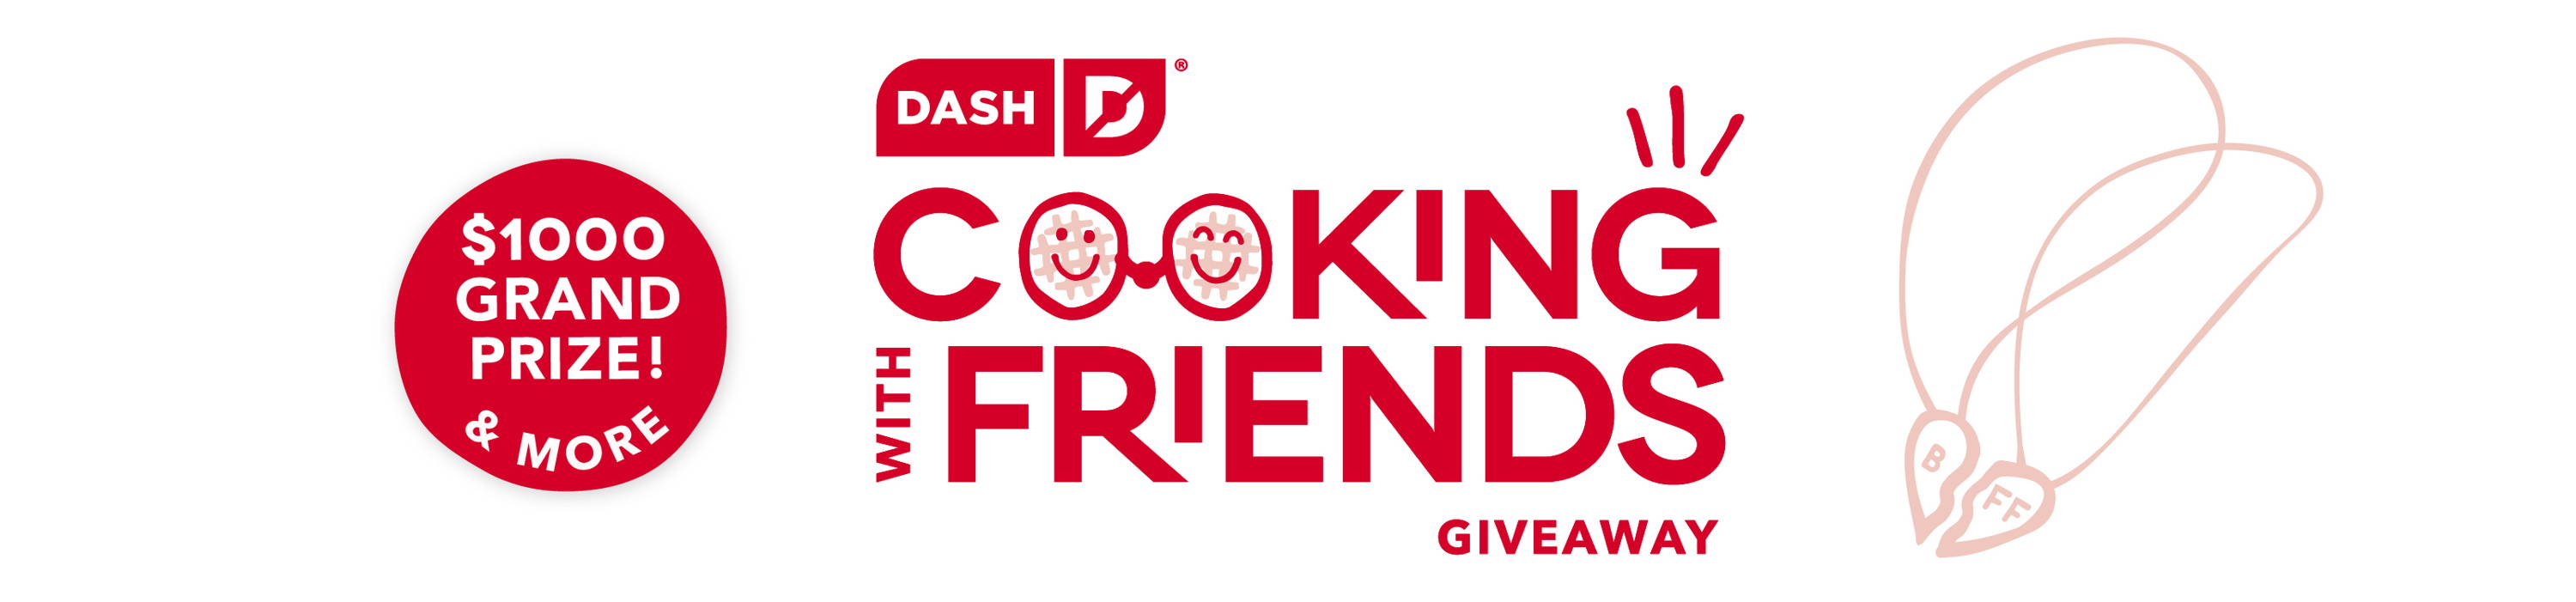 Dash Cooking With Friends Giveaway! $1000 grand prize and more!